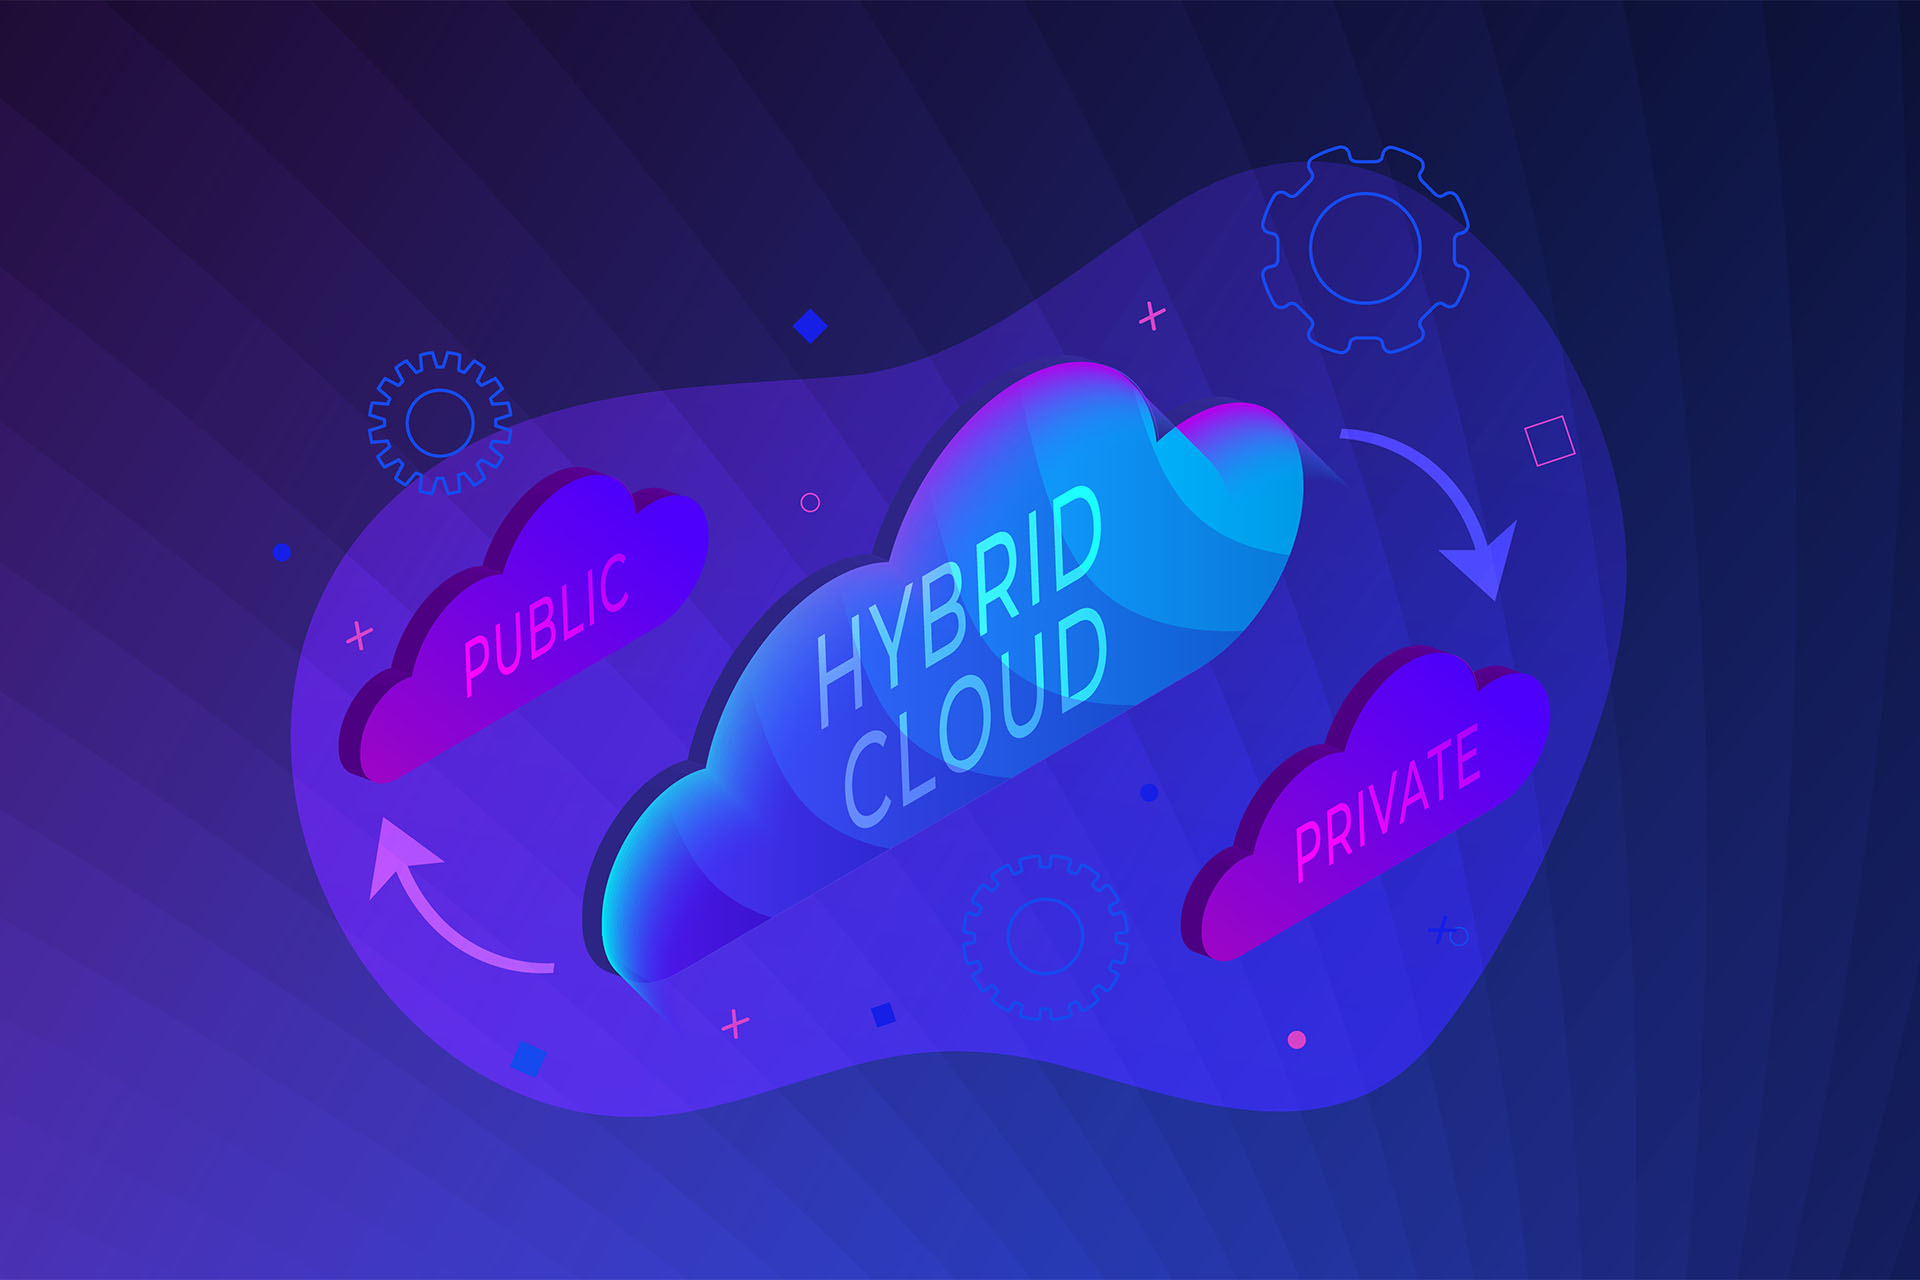 Public, Private, and Hybrid Cloud Explained